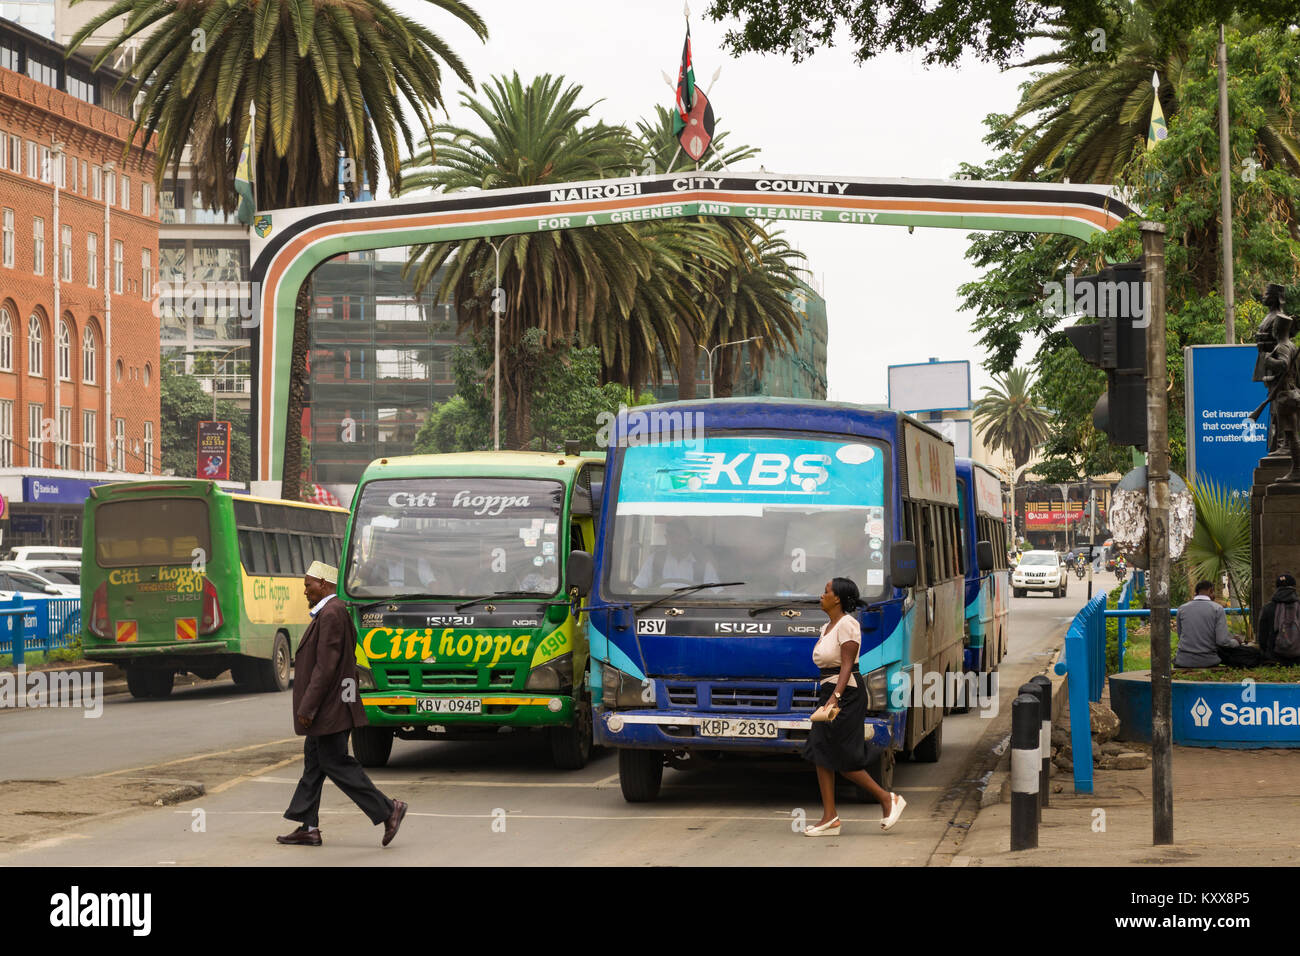 View down Kenyatta Avenue with the Nairobi City County sign above the road as buses wait at the traffic lights and pedestrians cross the road, Nairobi Stock Photo